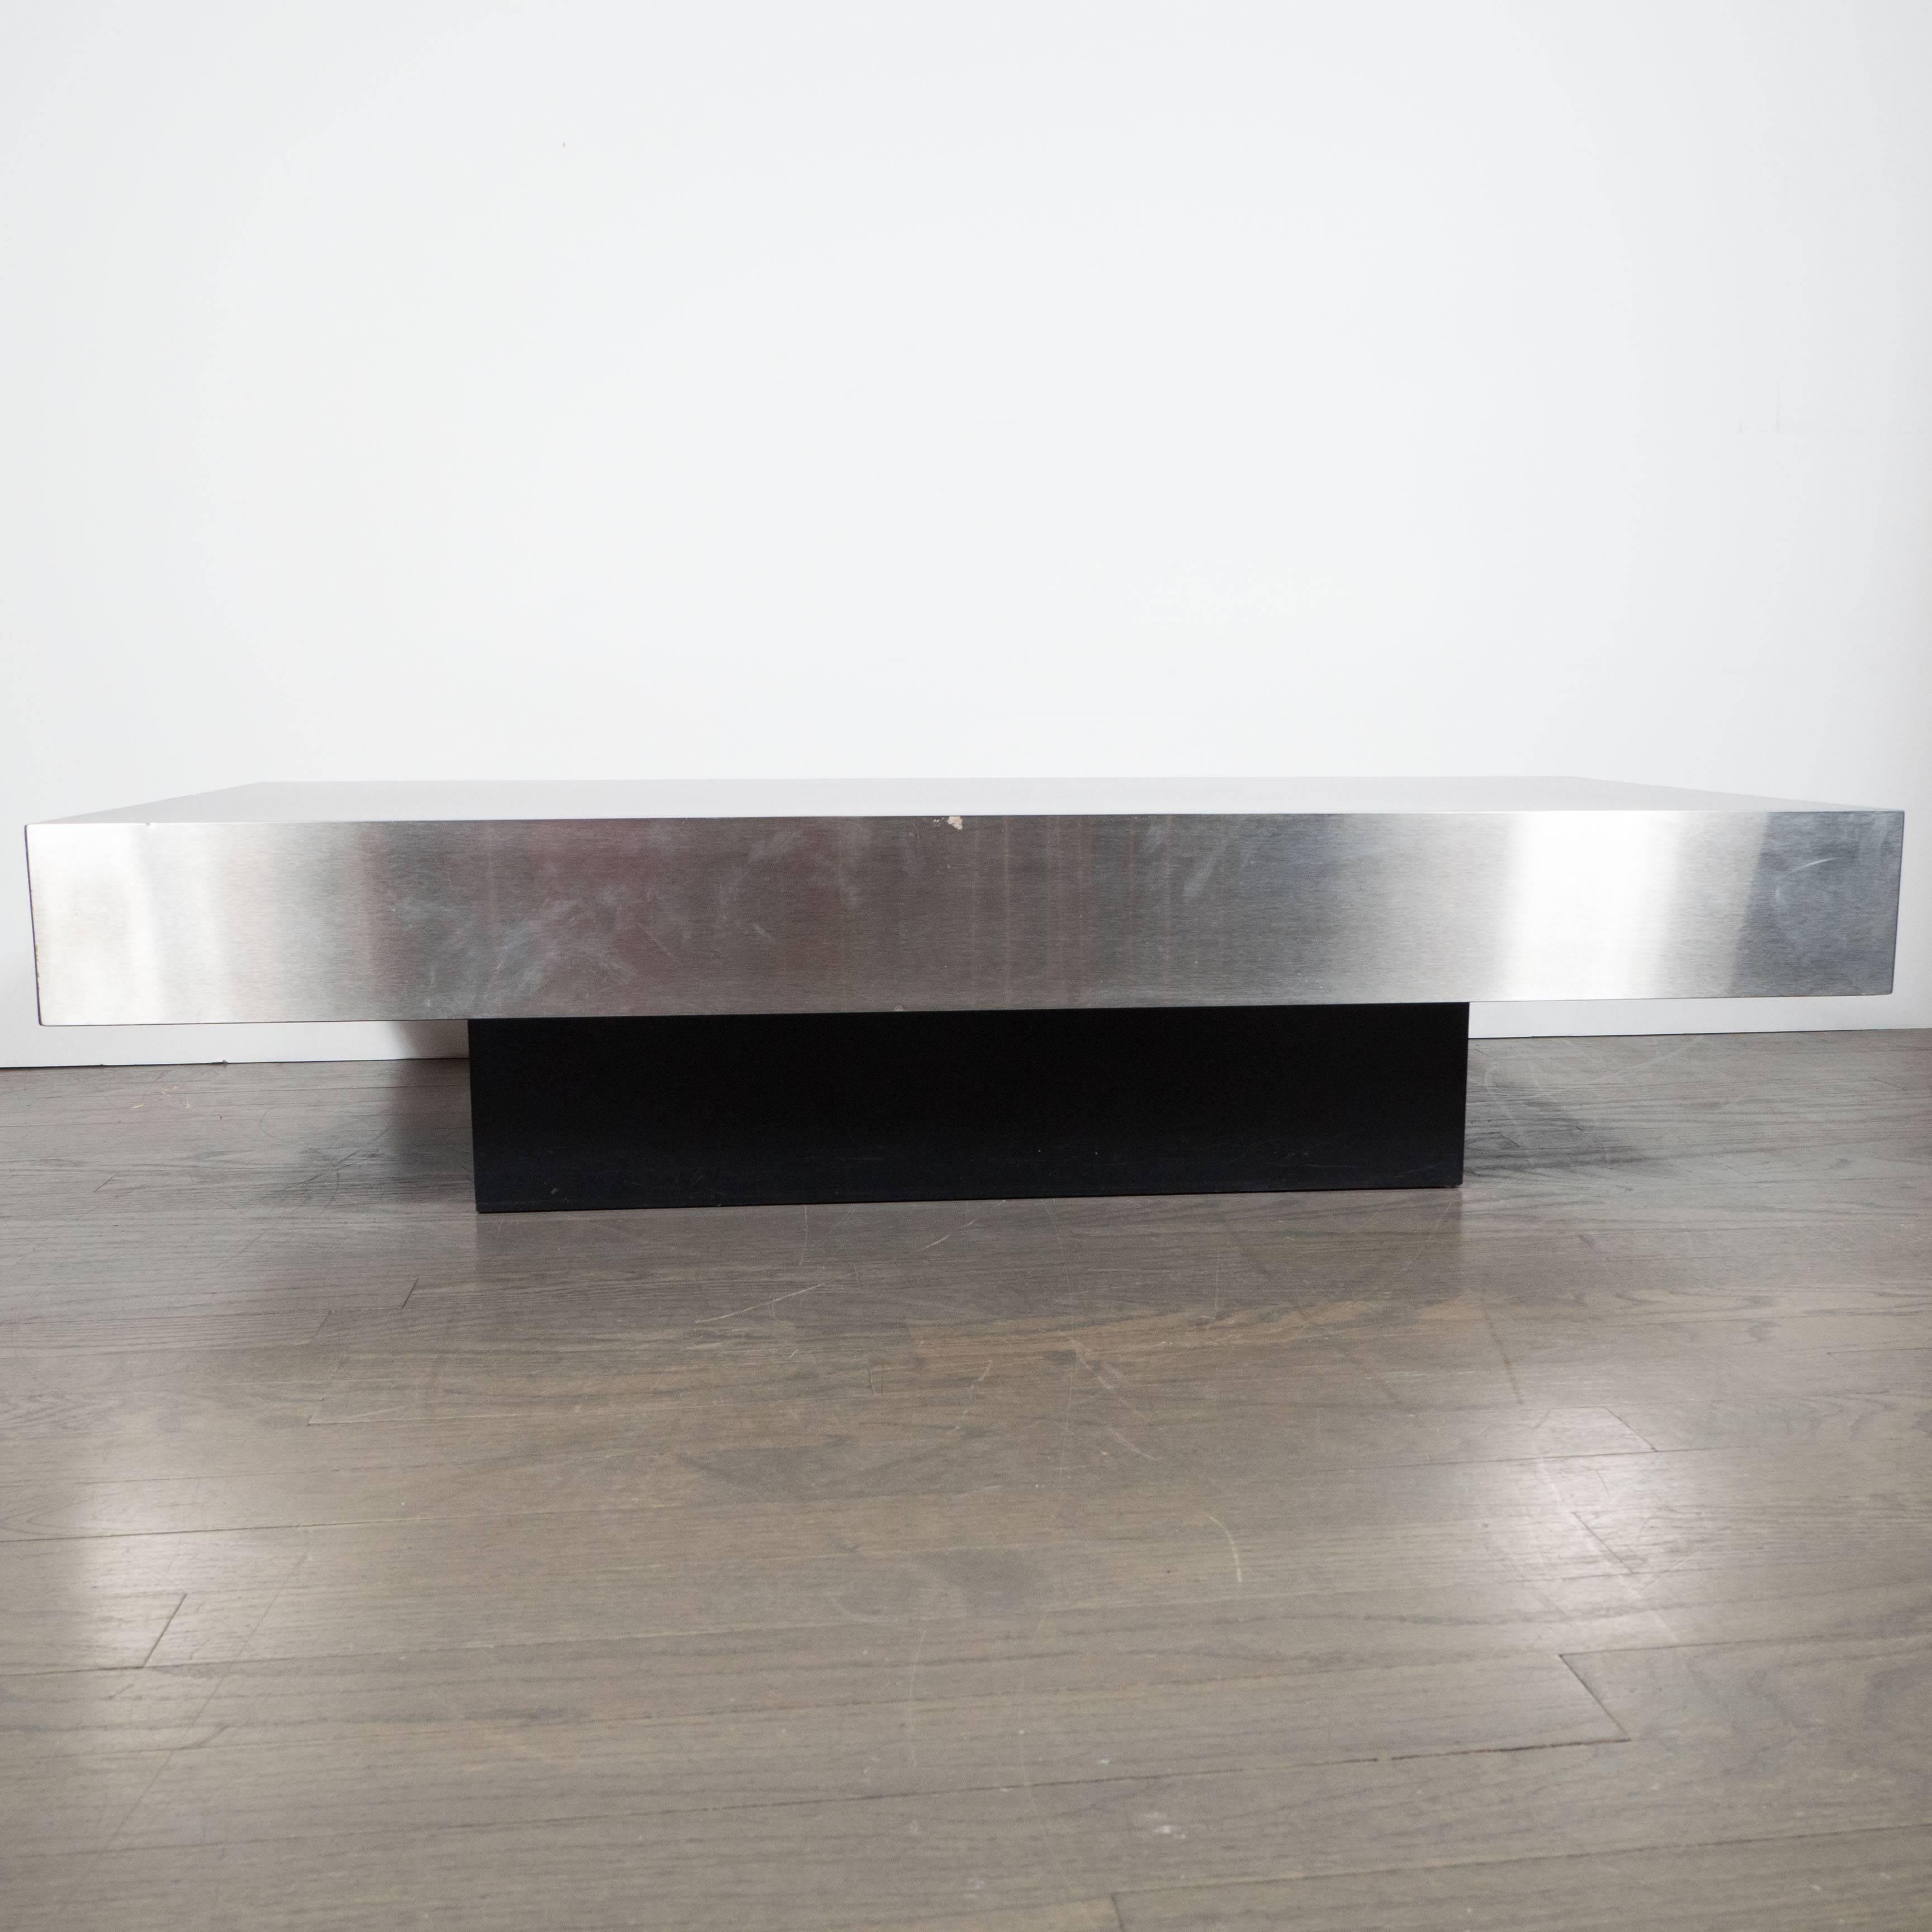 A Mid-Century modernist low rectangular cocktail table in brushed aluminium in the style of Breuton. Brush aluminium panels cover the sides of the piece while the top is a black laminate. The base is ebonized walnut. A Minimalist, clean cocktail